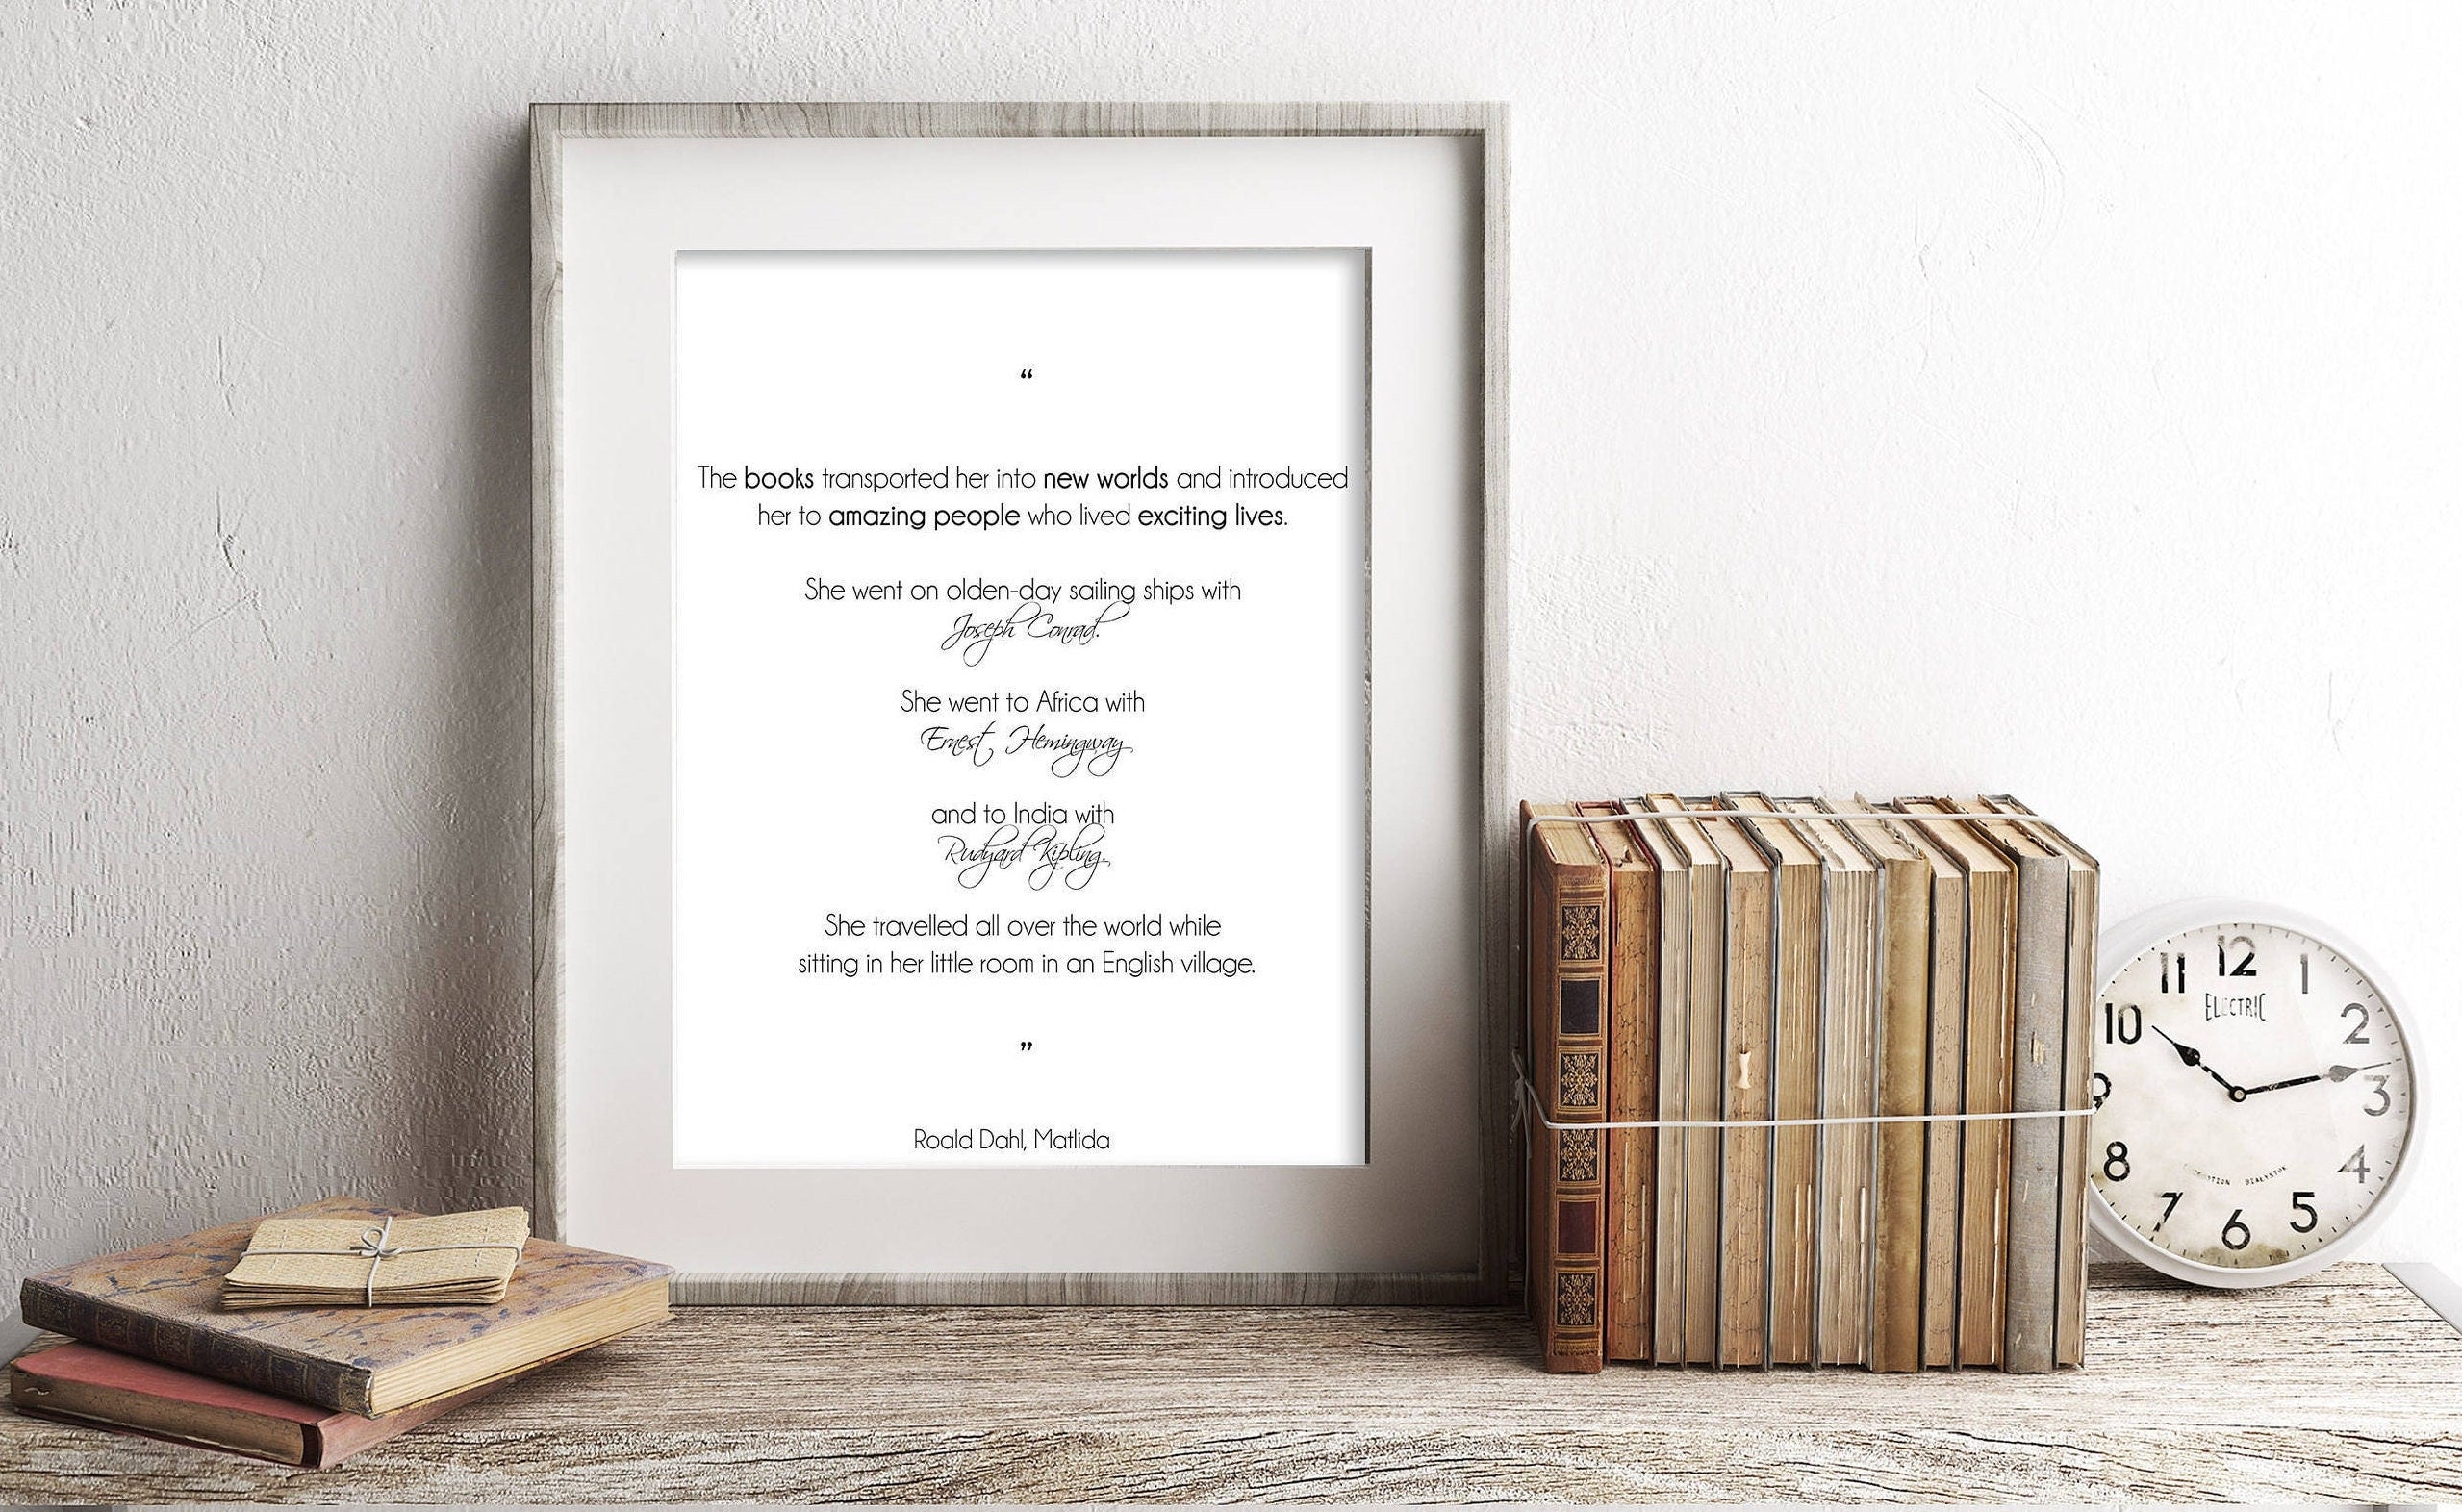 Roald Dahl Matilda Books Transported Her Quote Literary Art Poster, Book Quote Art